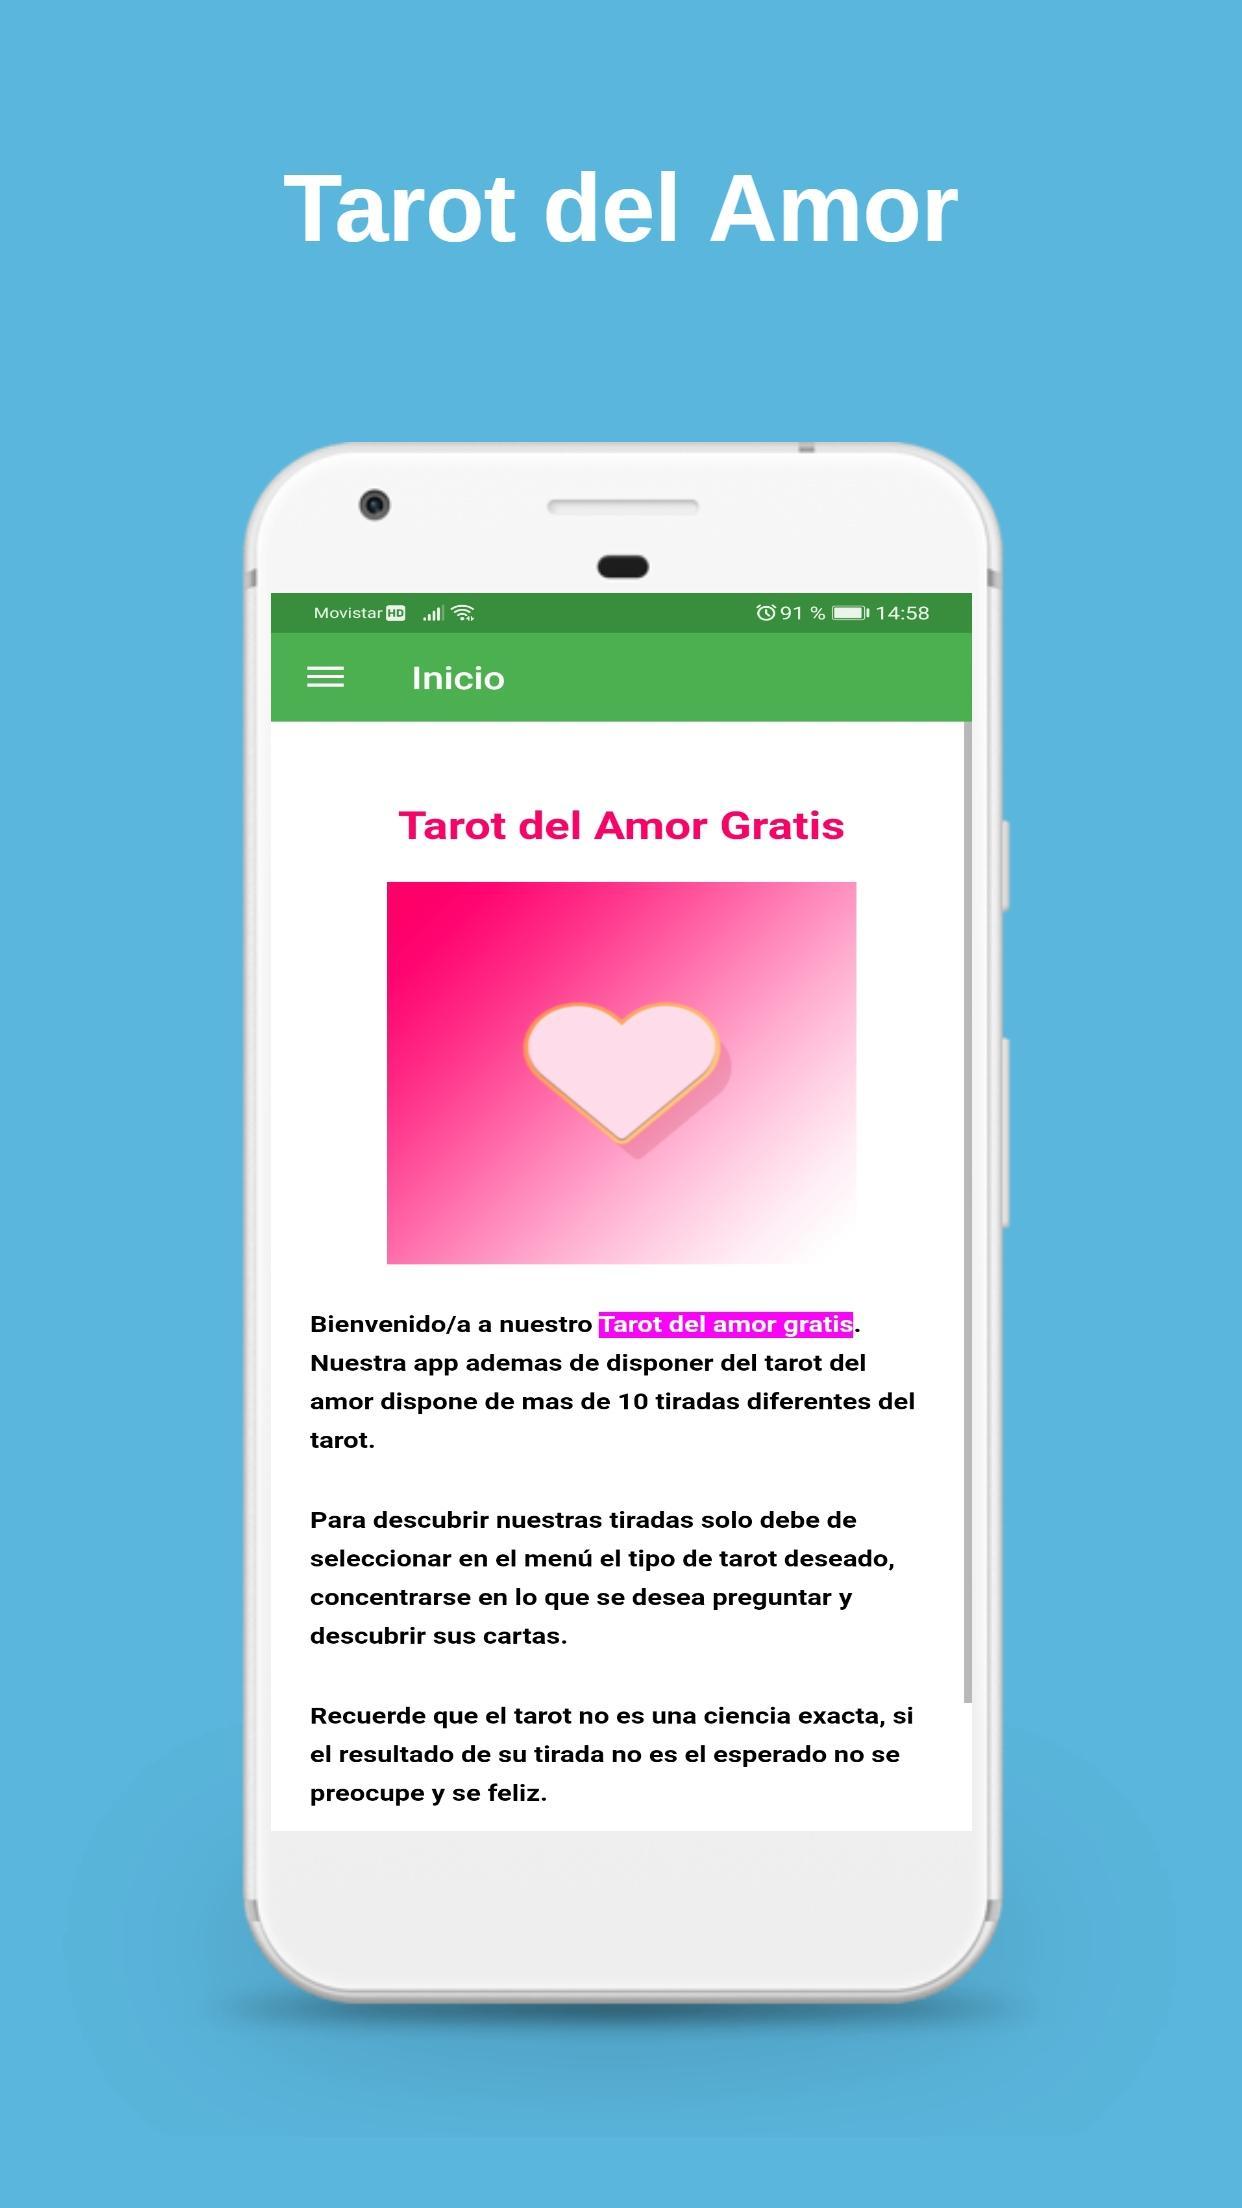 Tarot del Amor for Android - APK Download